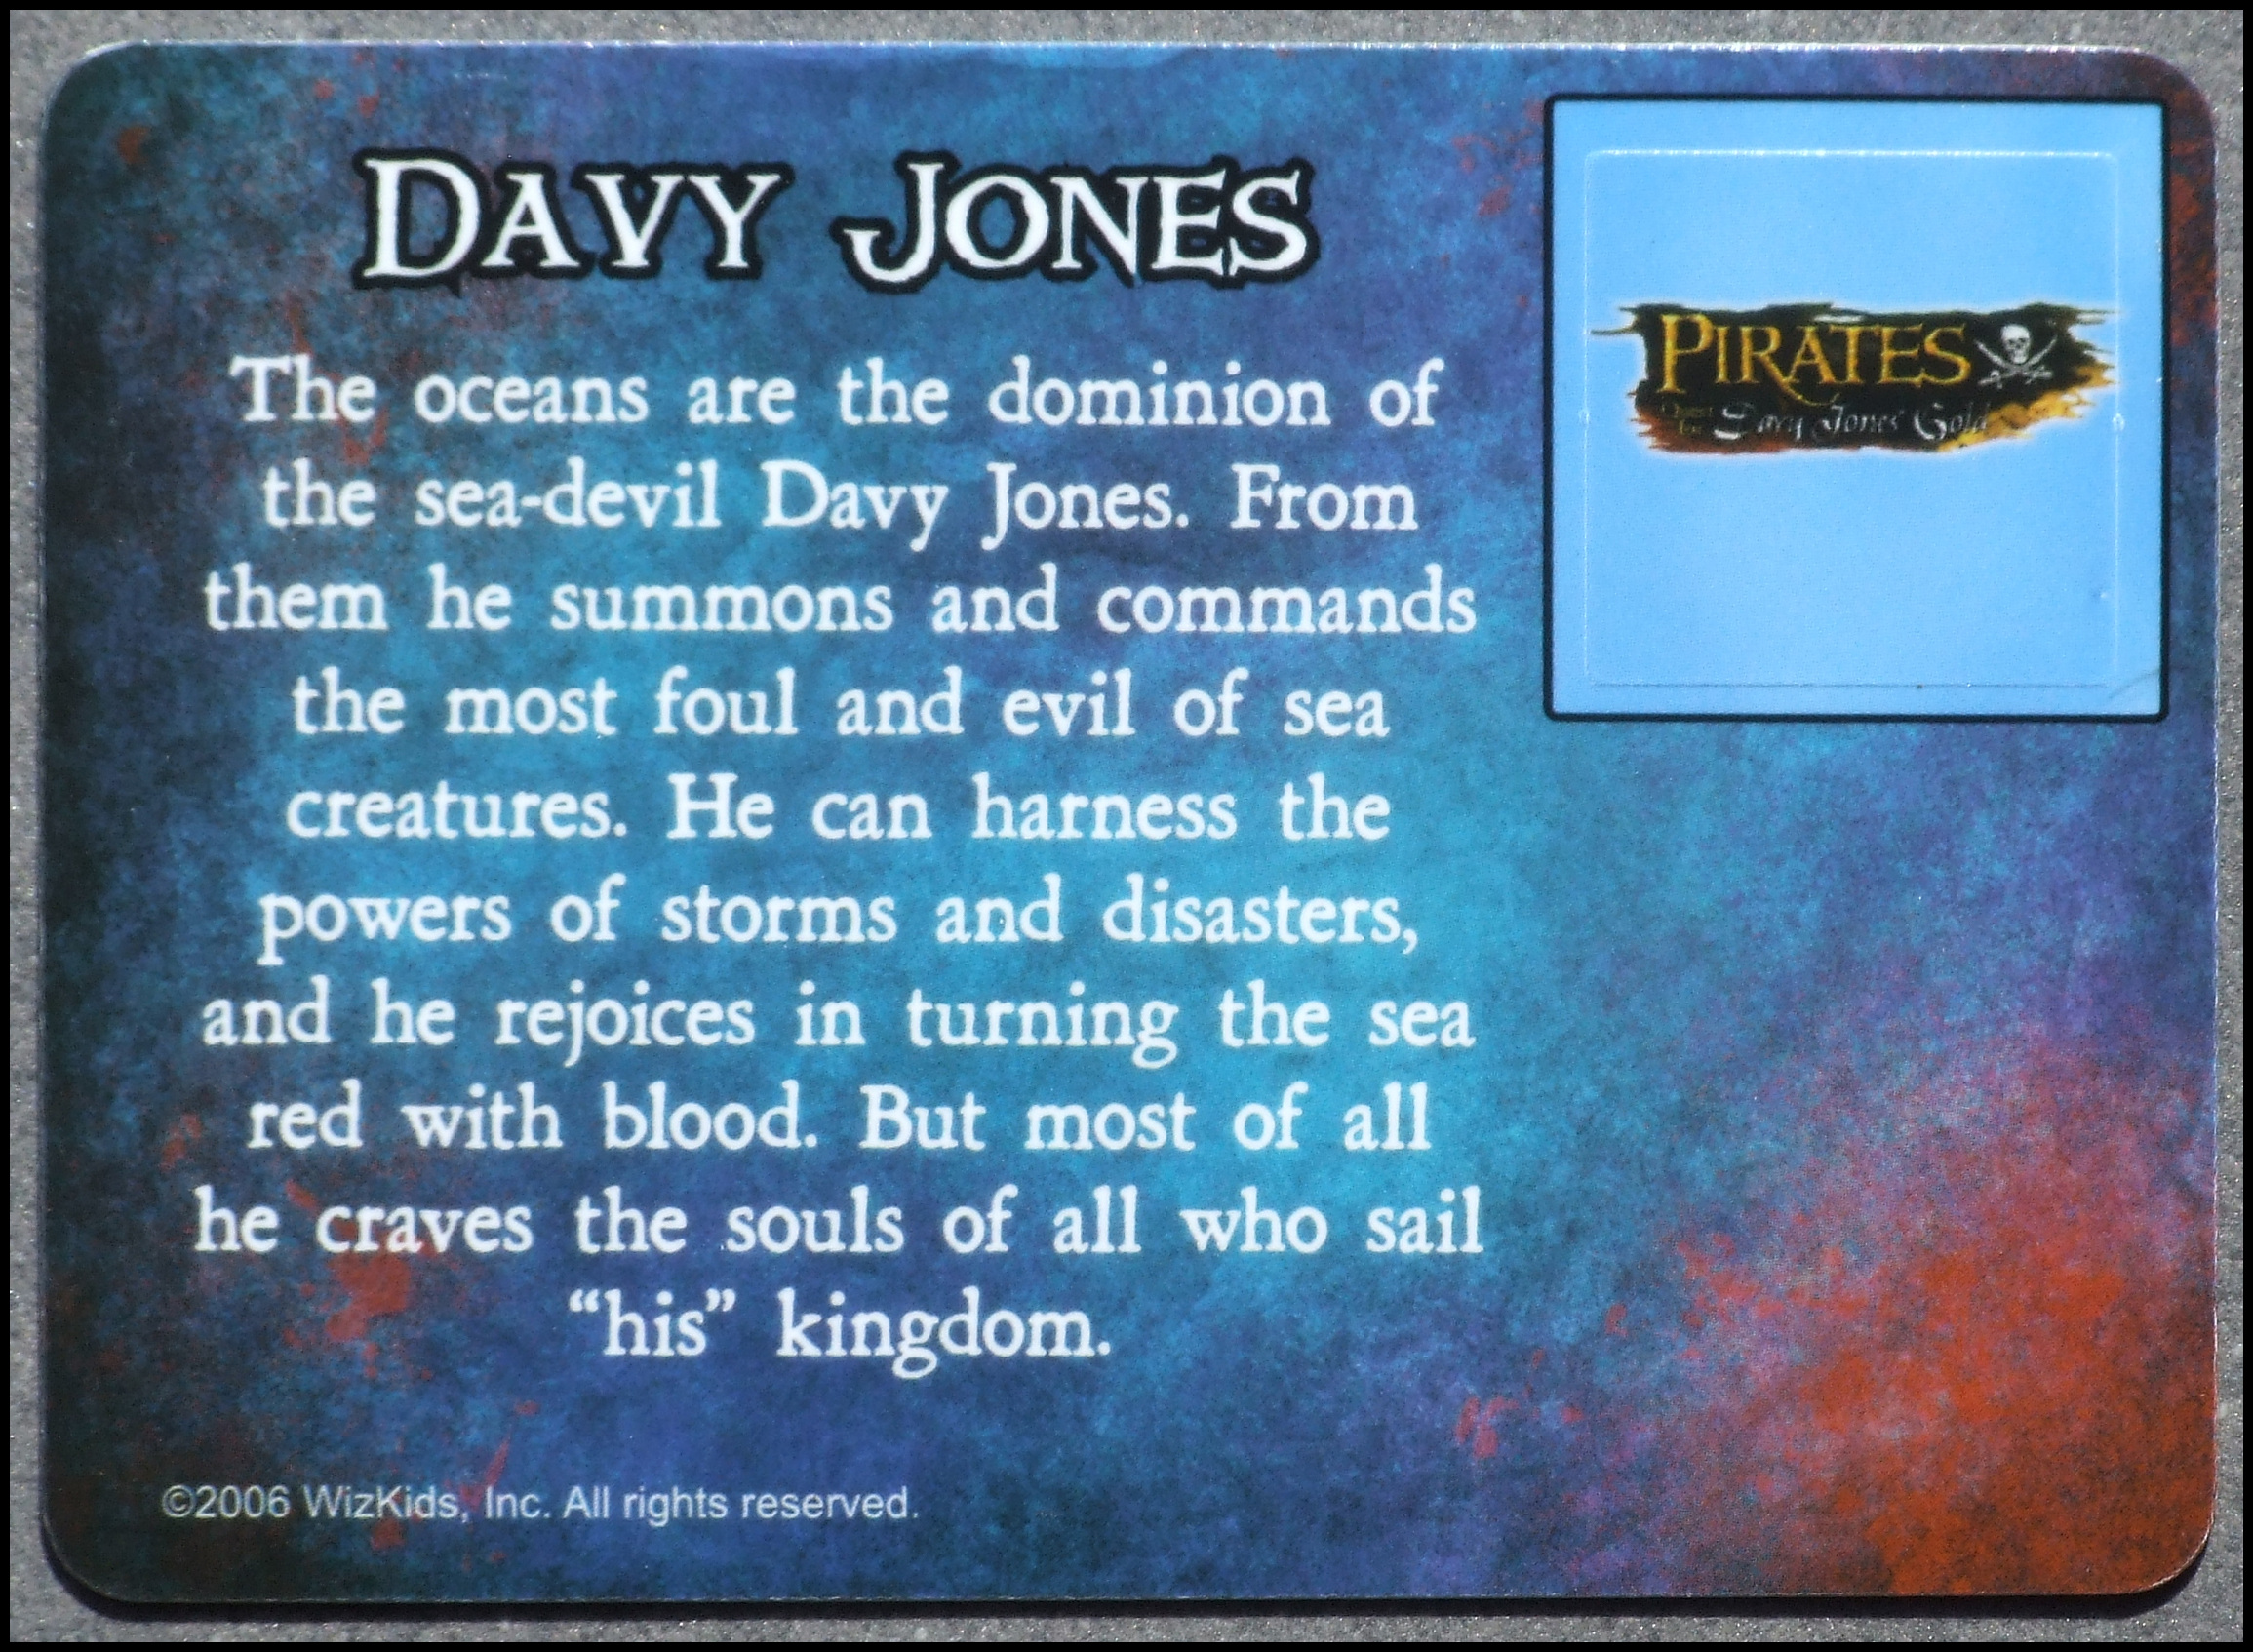 Pirates Quest For Davy Jones' Gold Board Game - Davy Jones Card Back